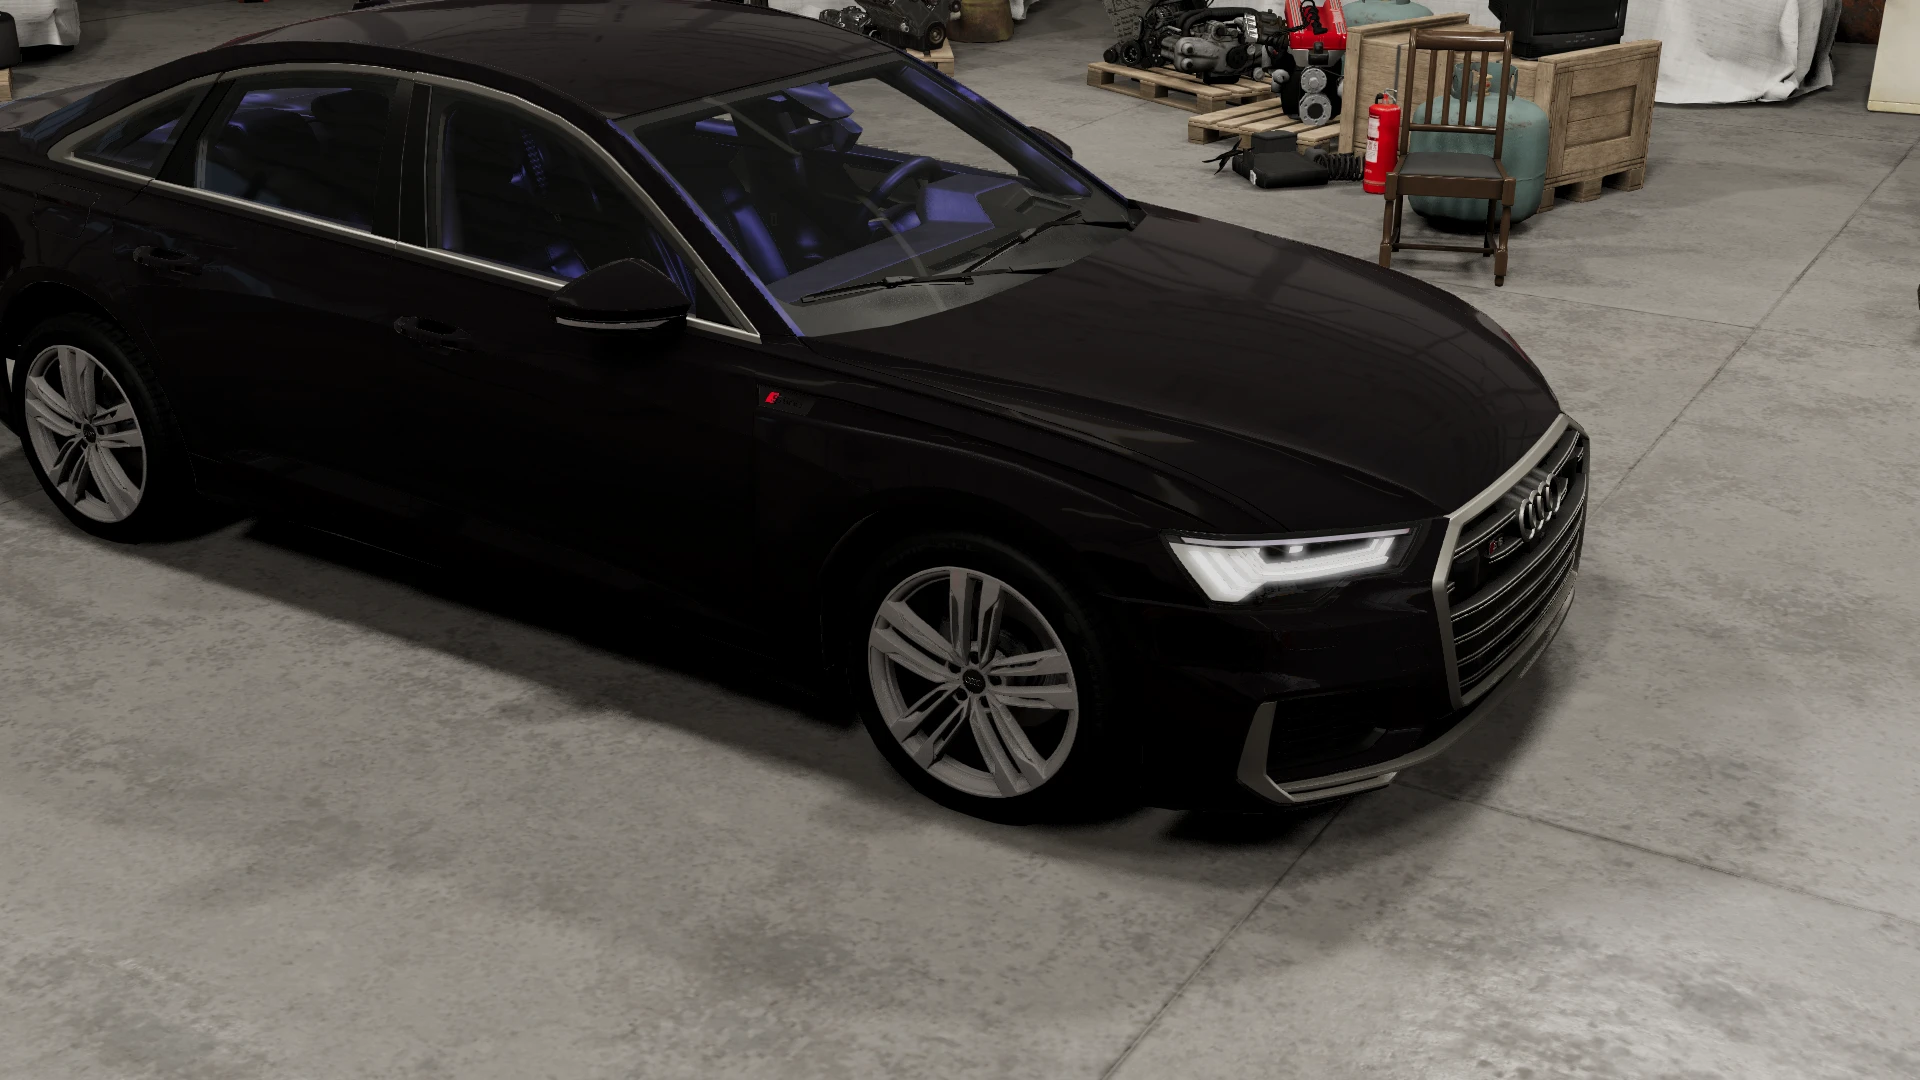 Audi A6/S6 C8 [Free] Update - BeamNG.drive